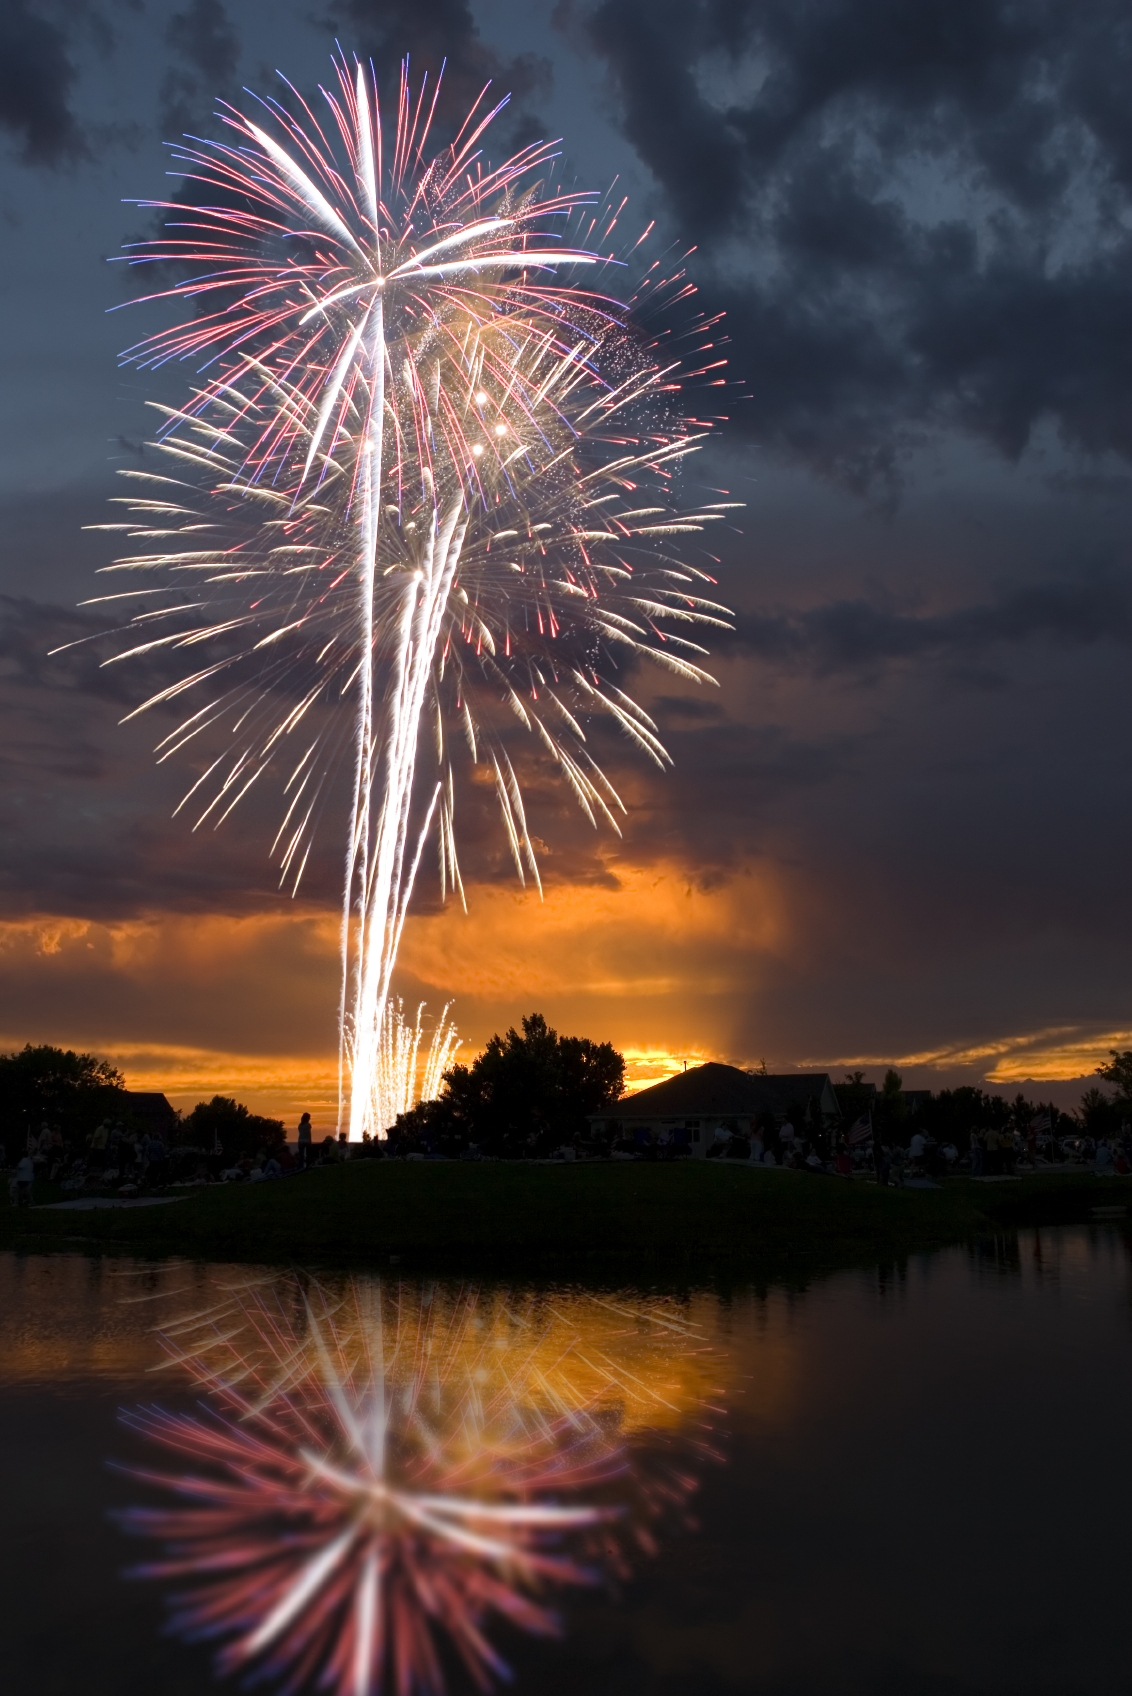 Fireworks over a body of water with a sunset